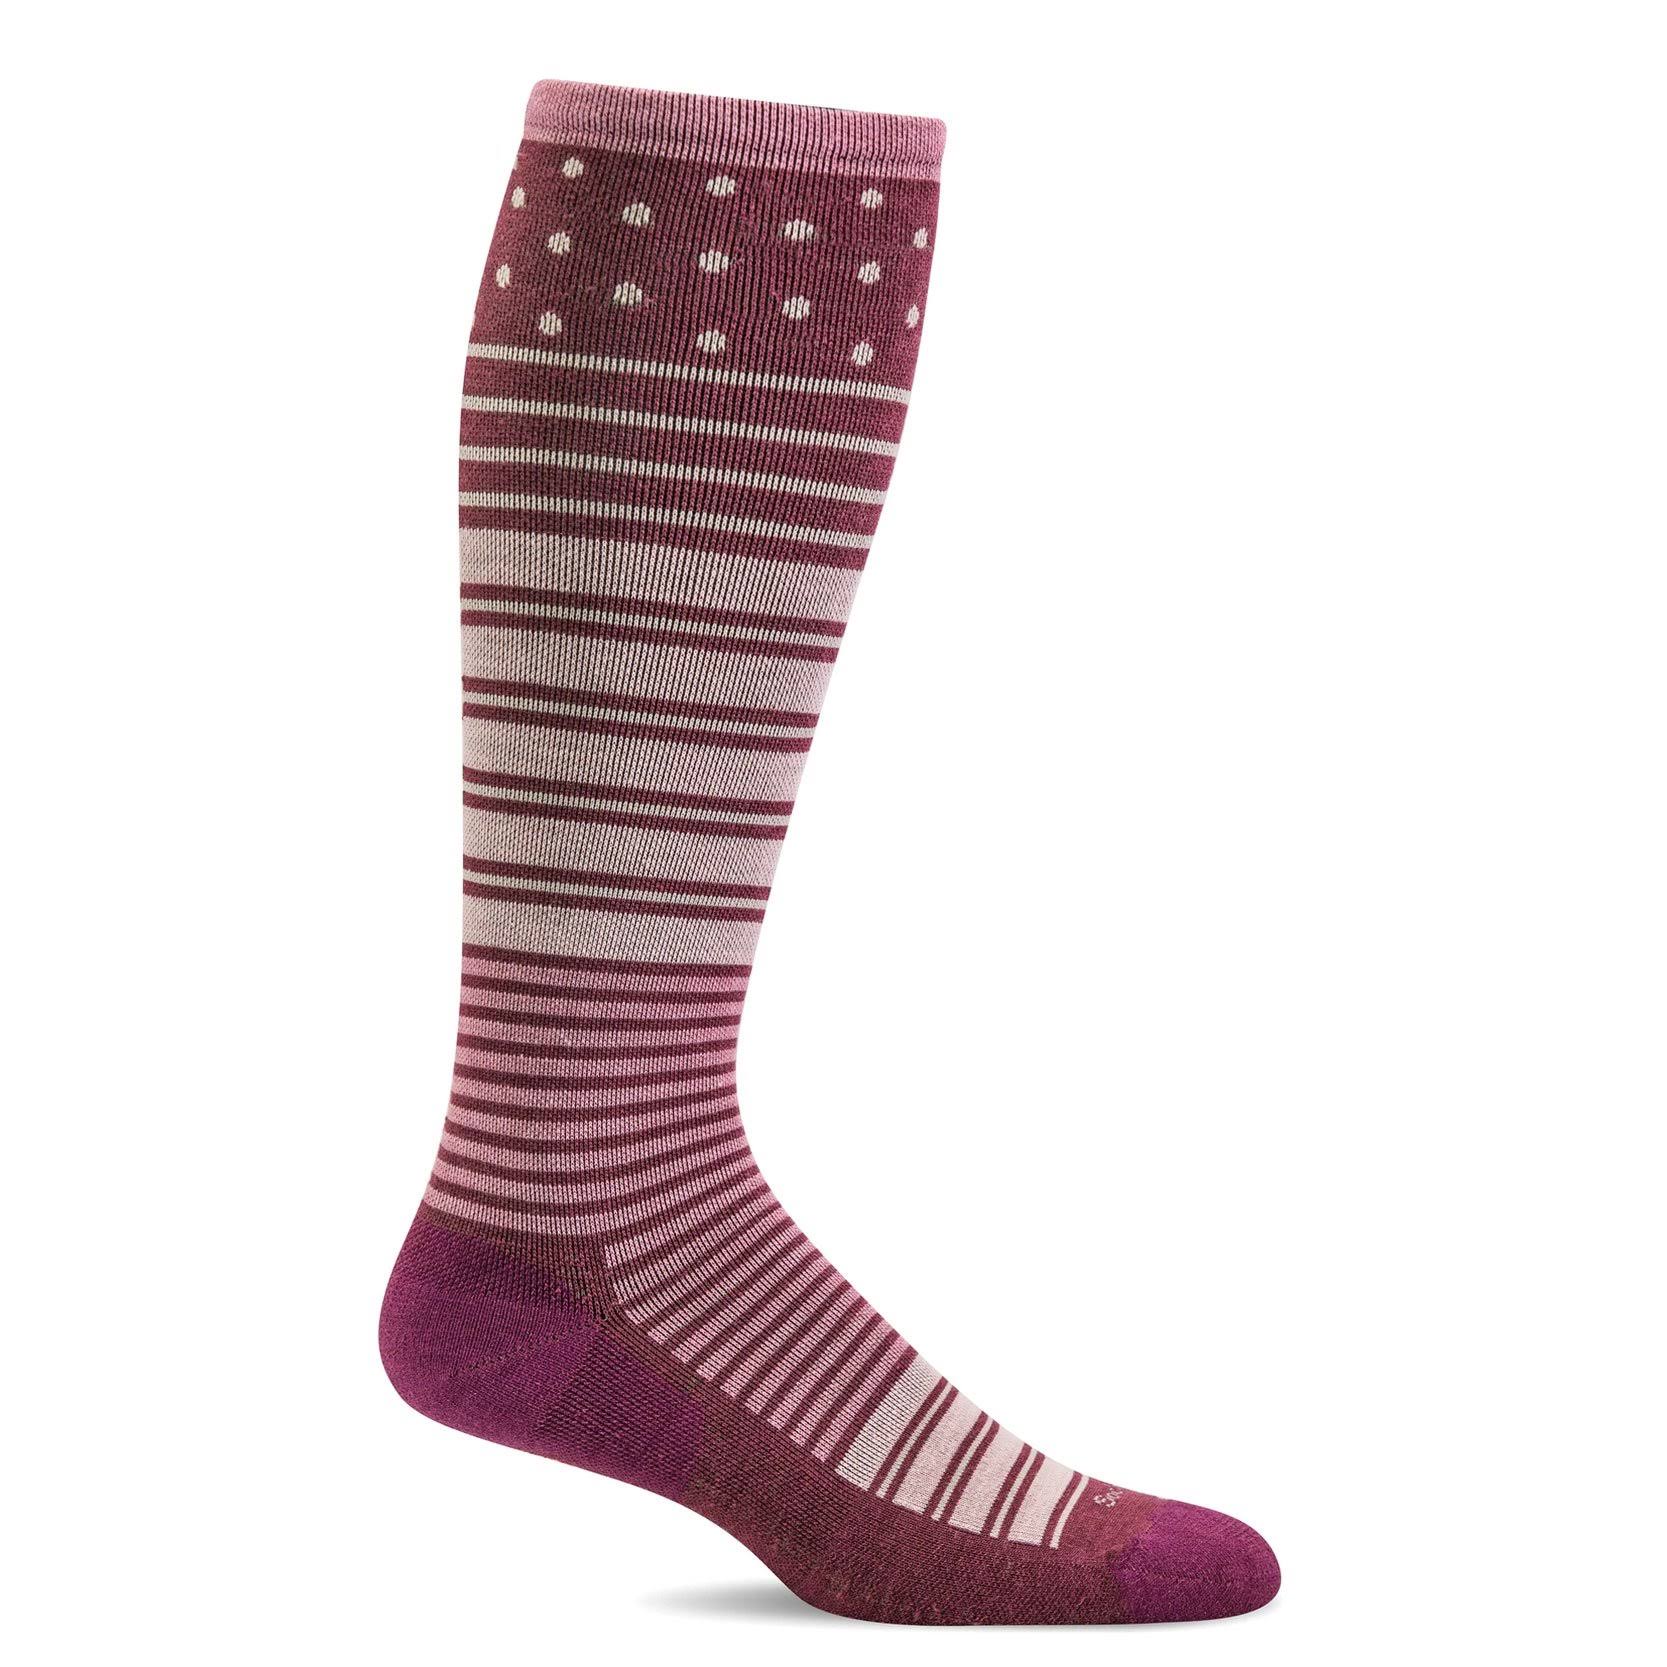 Sockwell Women's Twister Firm Compression Socks S/M / Mulberry